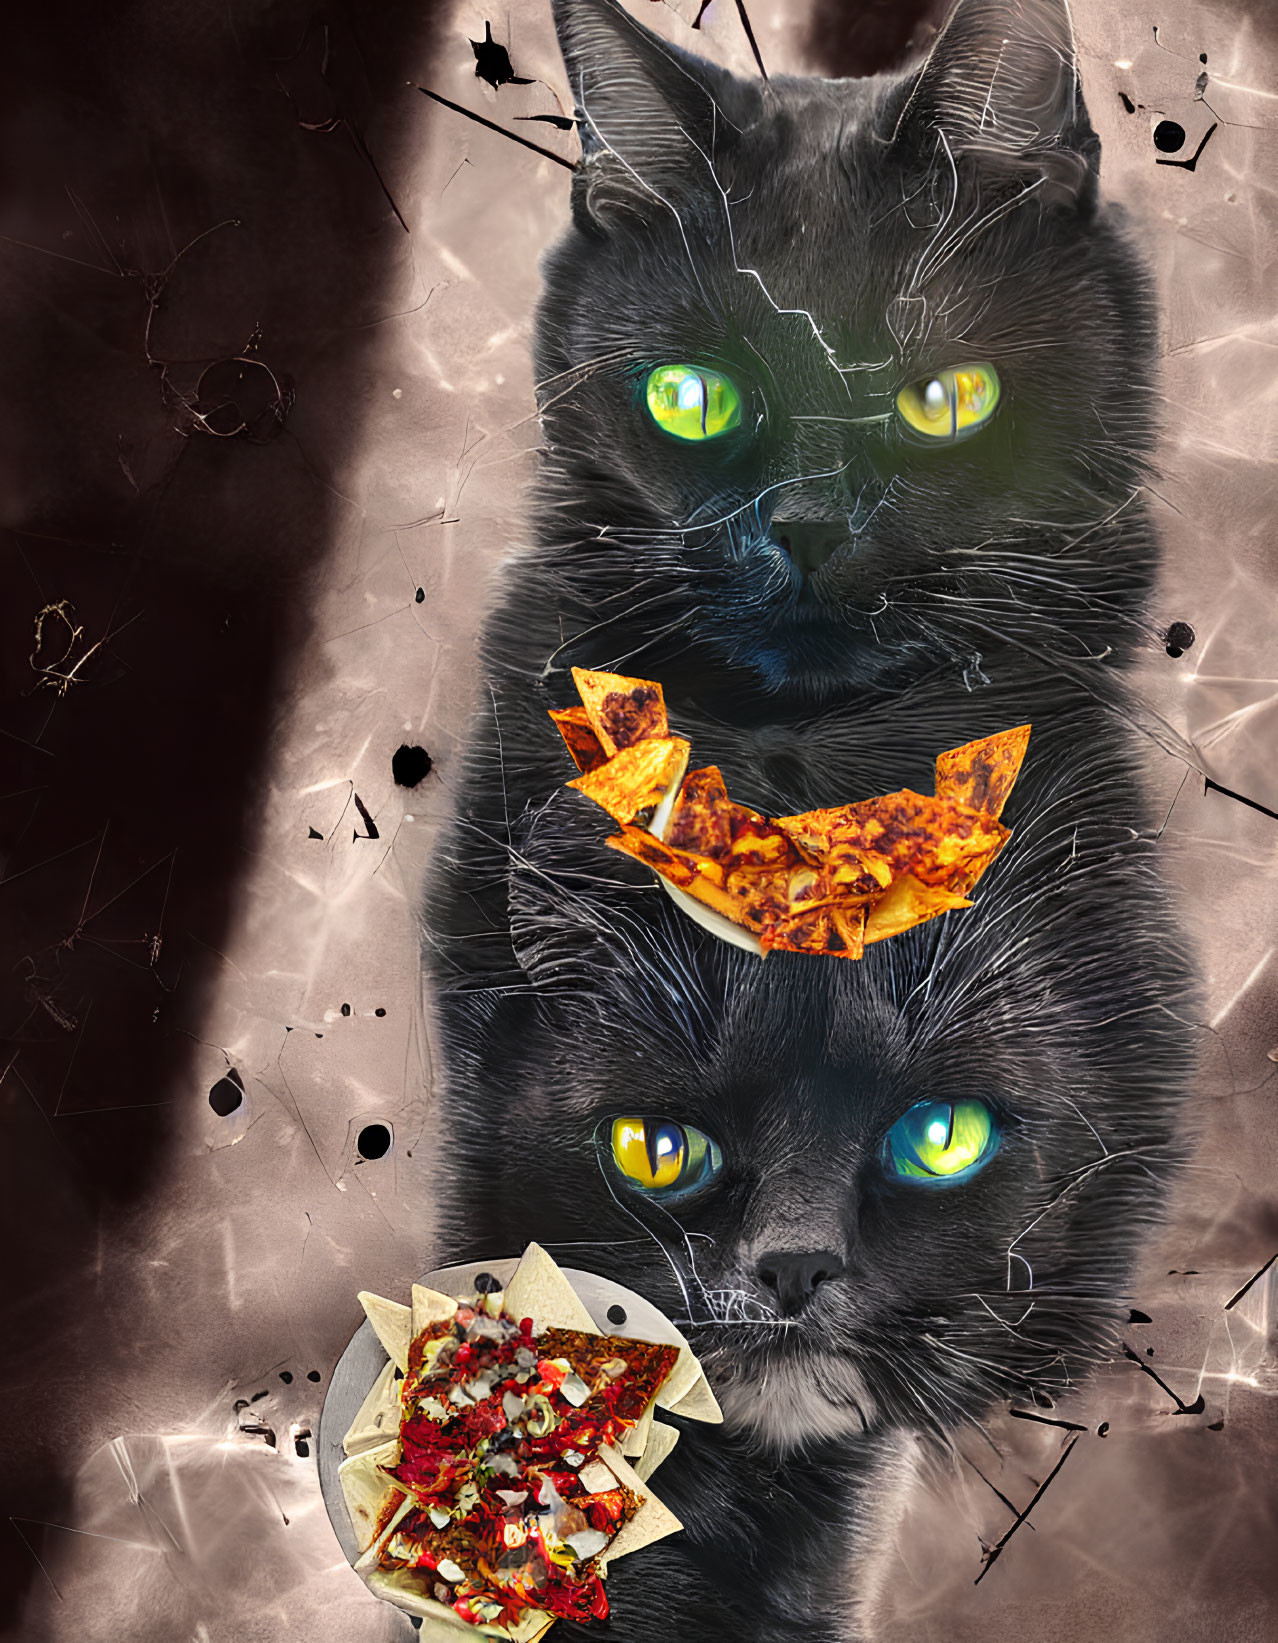 Surreal collage featuring black cat with green eyes and pizza slice collar on grunge-style backdrop